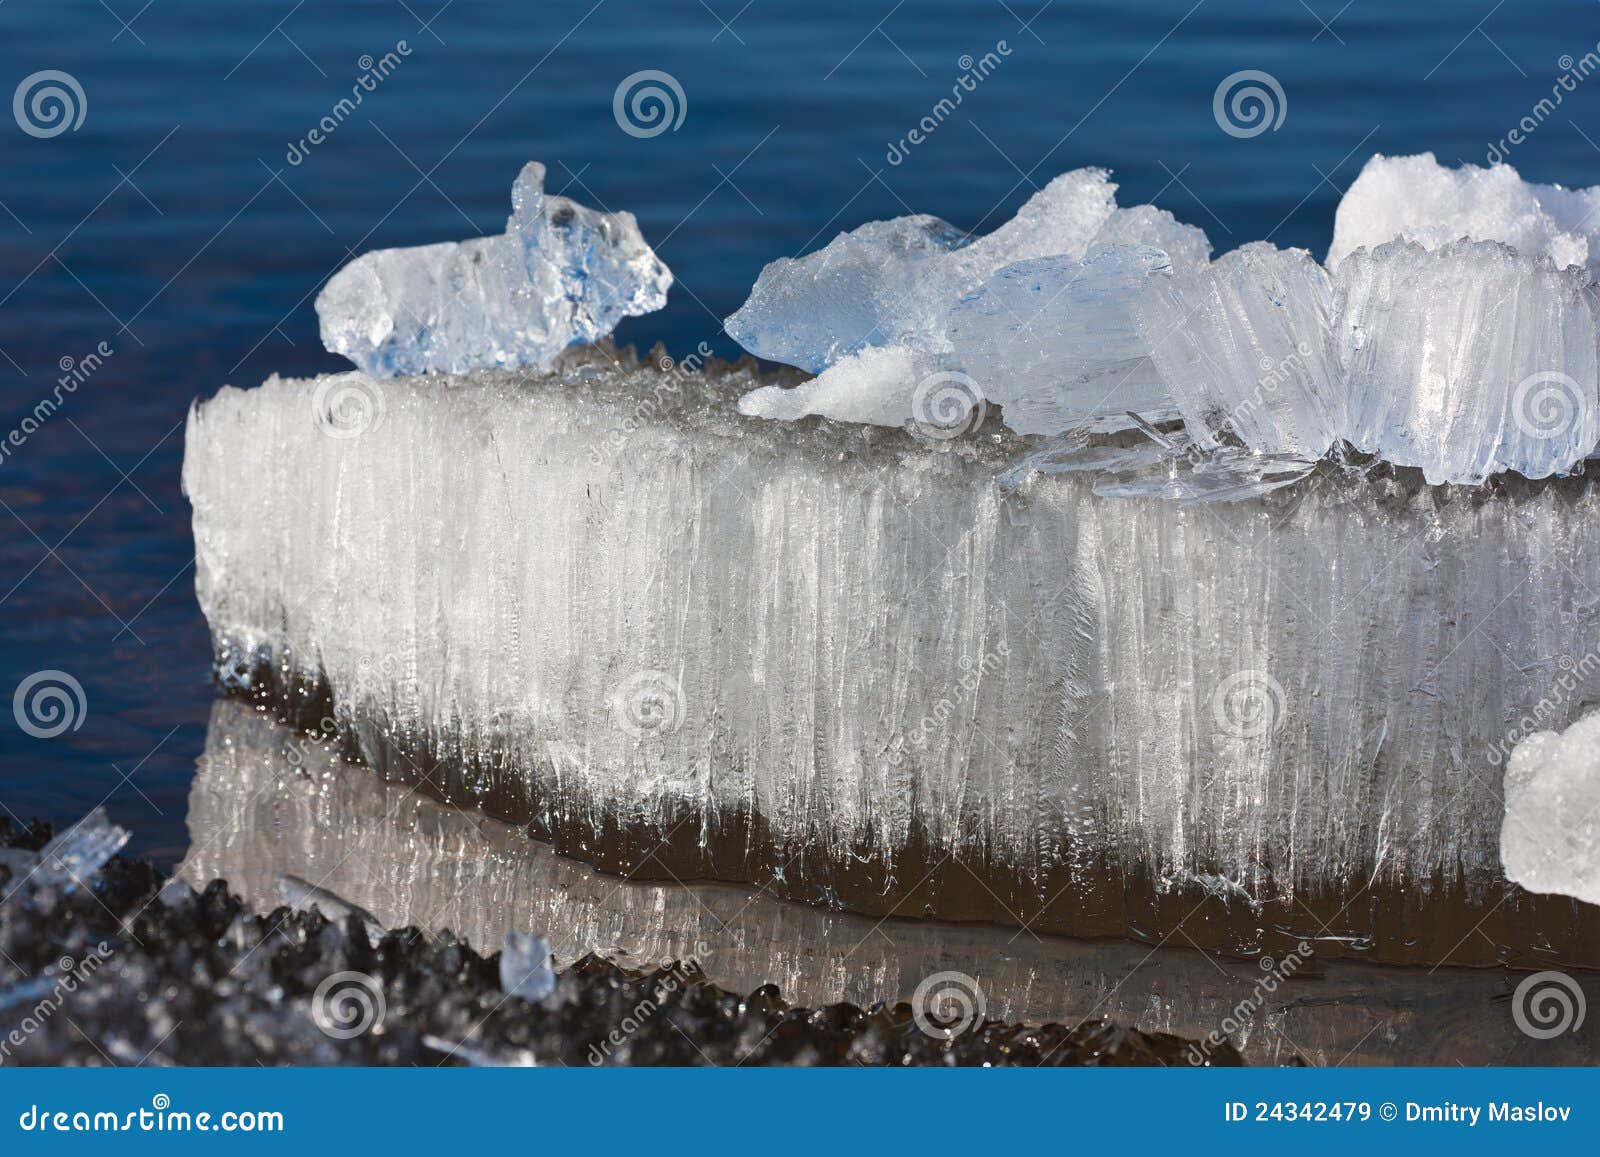 Spring ice stock image. Image of outdoors, closeup, natural - 24342479